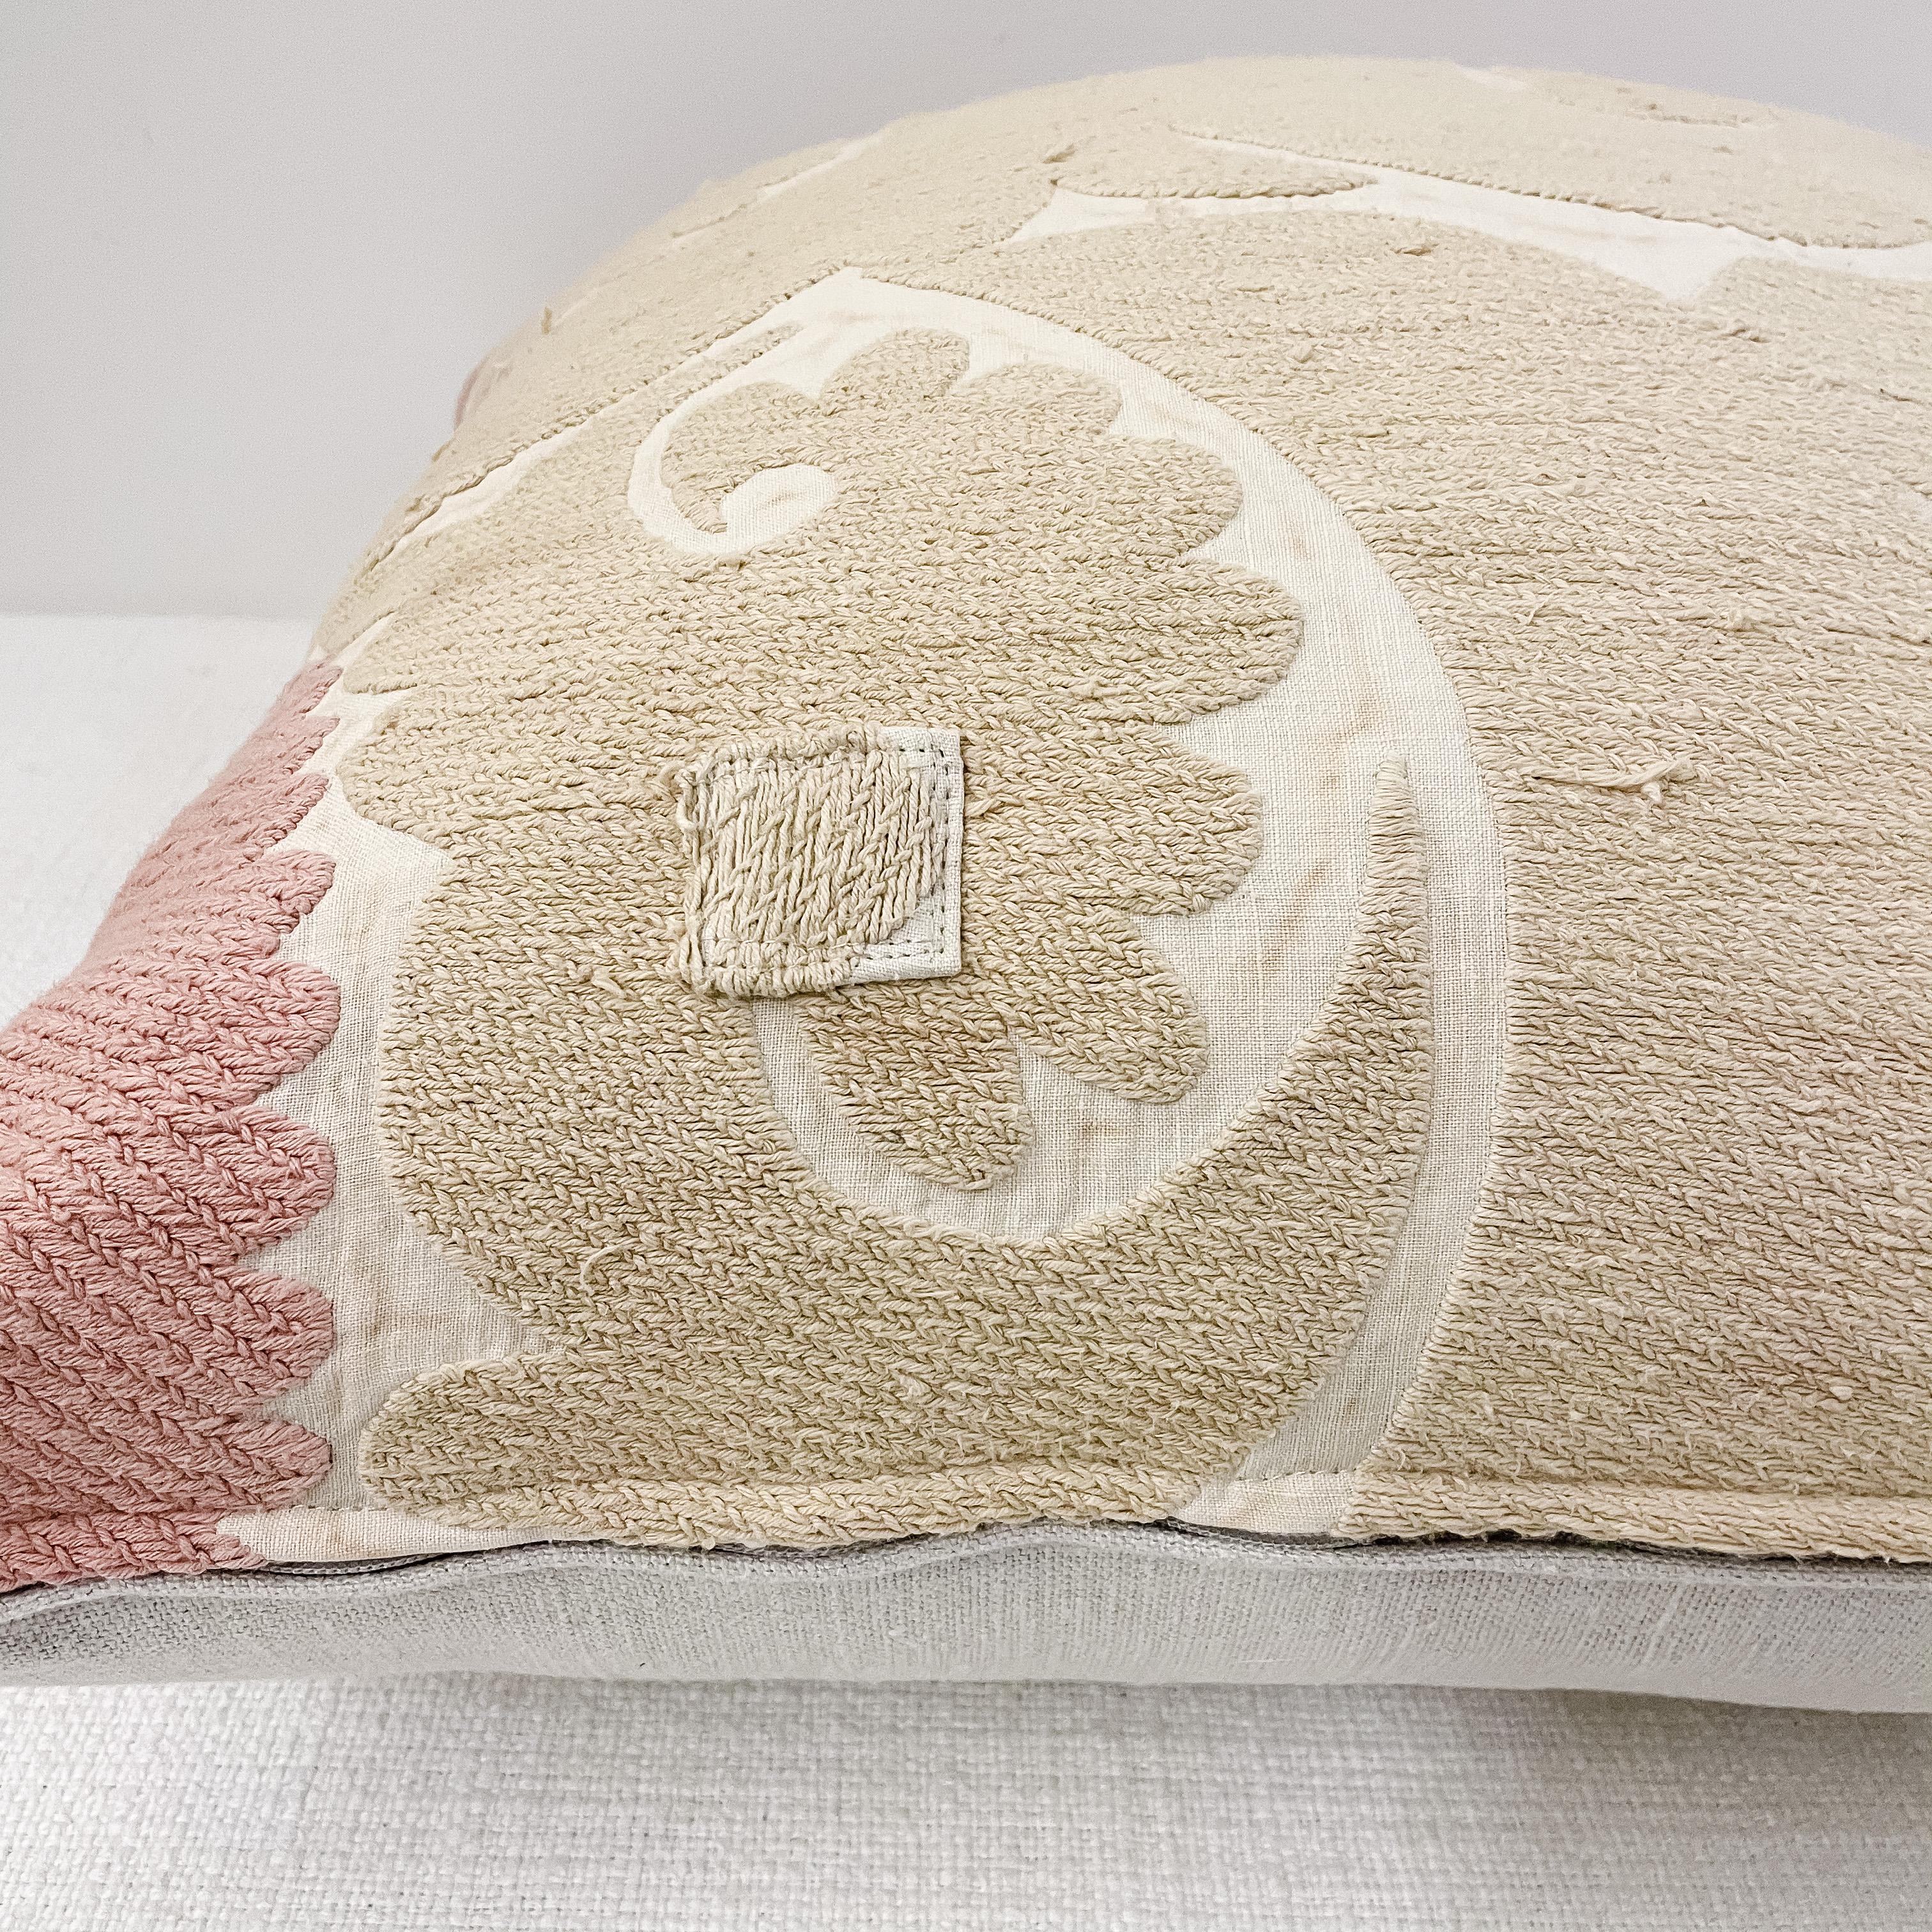 Linen Vintage Pale Pink and Tan Embroidered Suzani Pillow with Down Feather Insert